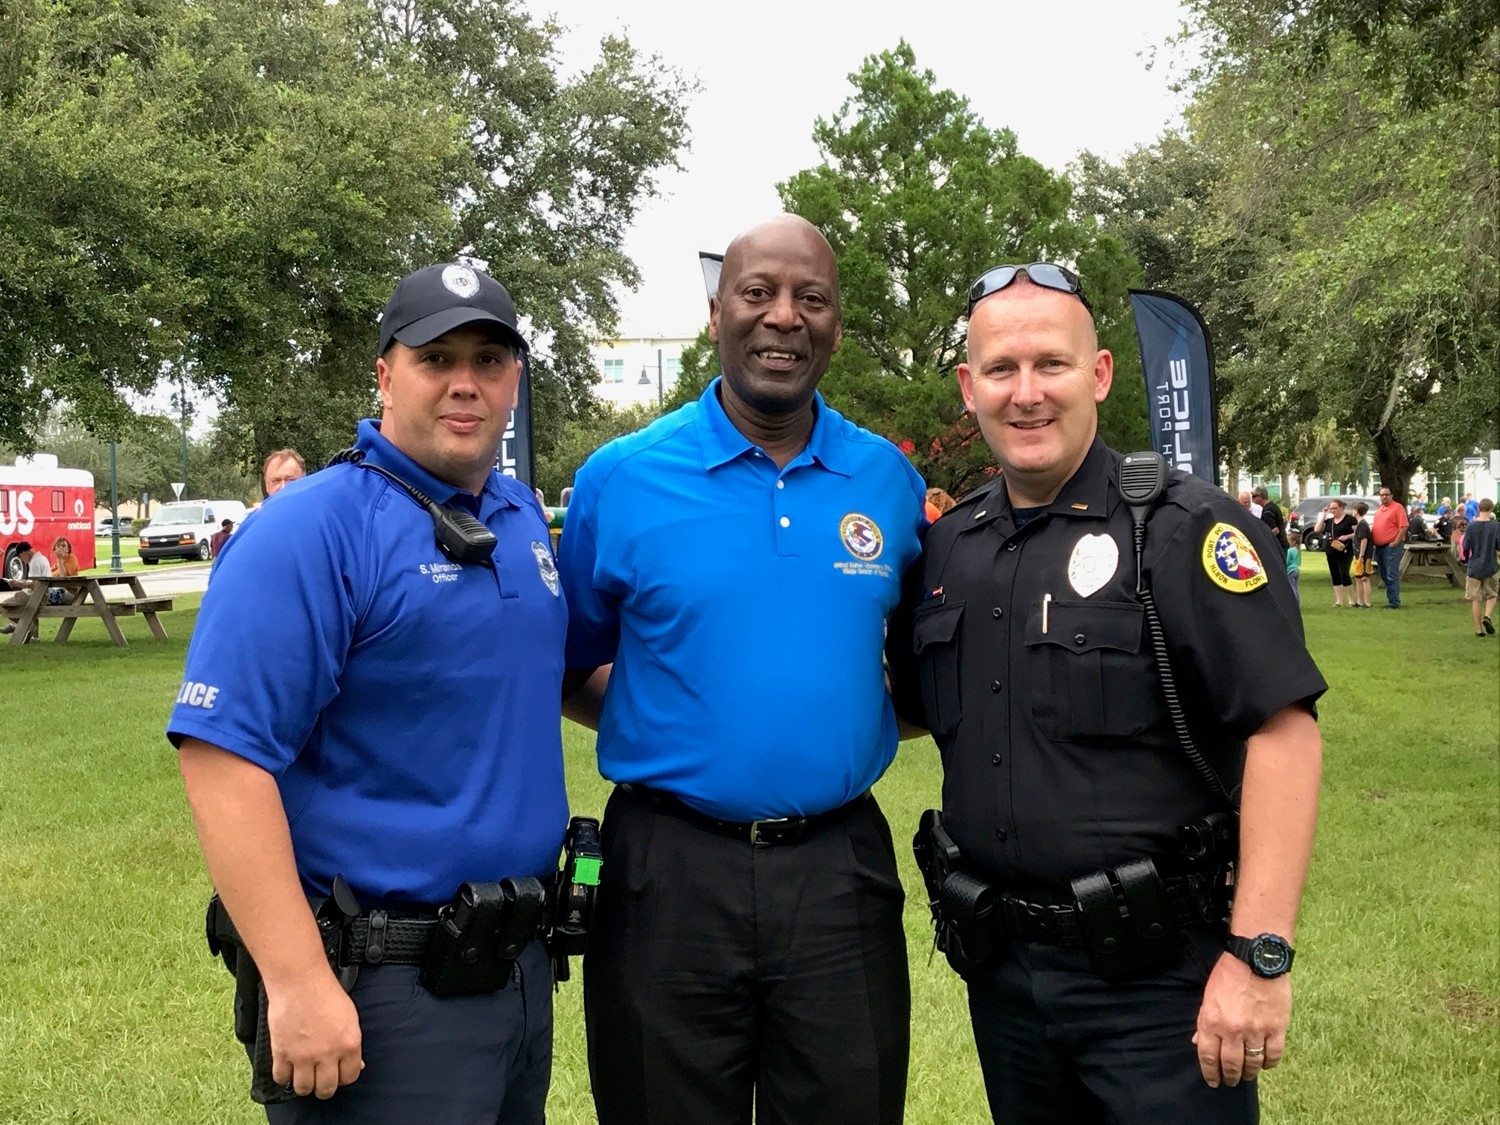 Sanford PD welcomed1500 community members to the NNO event.